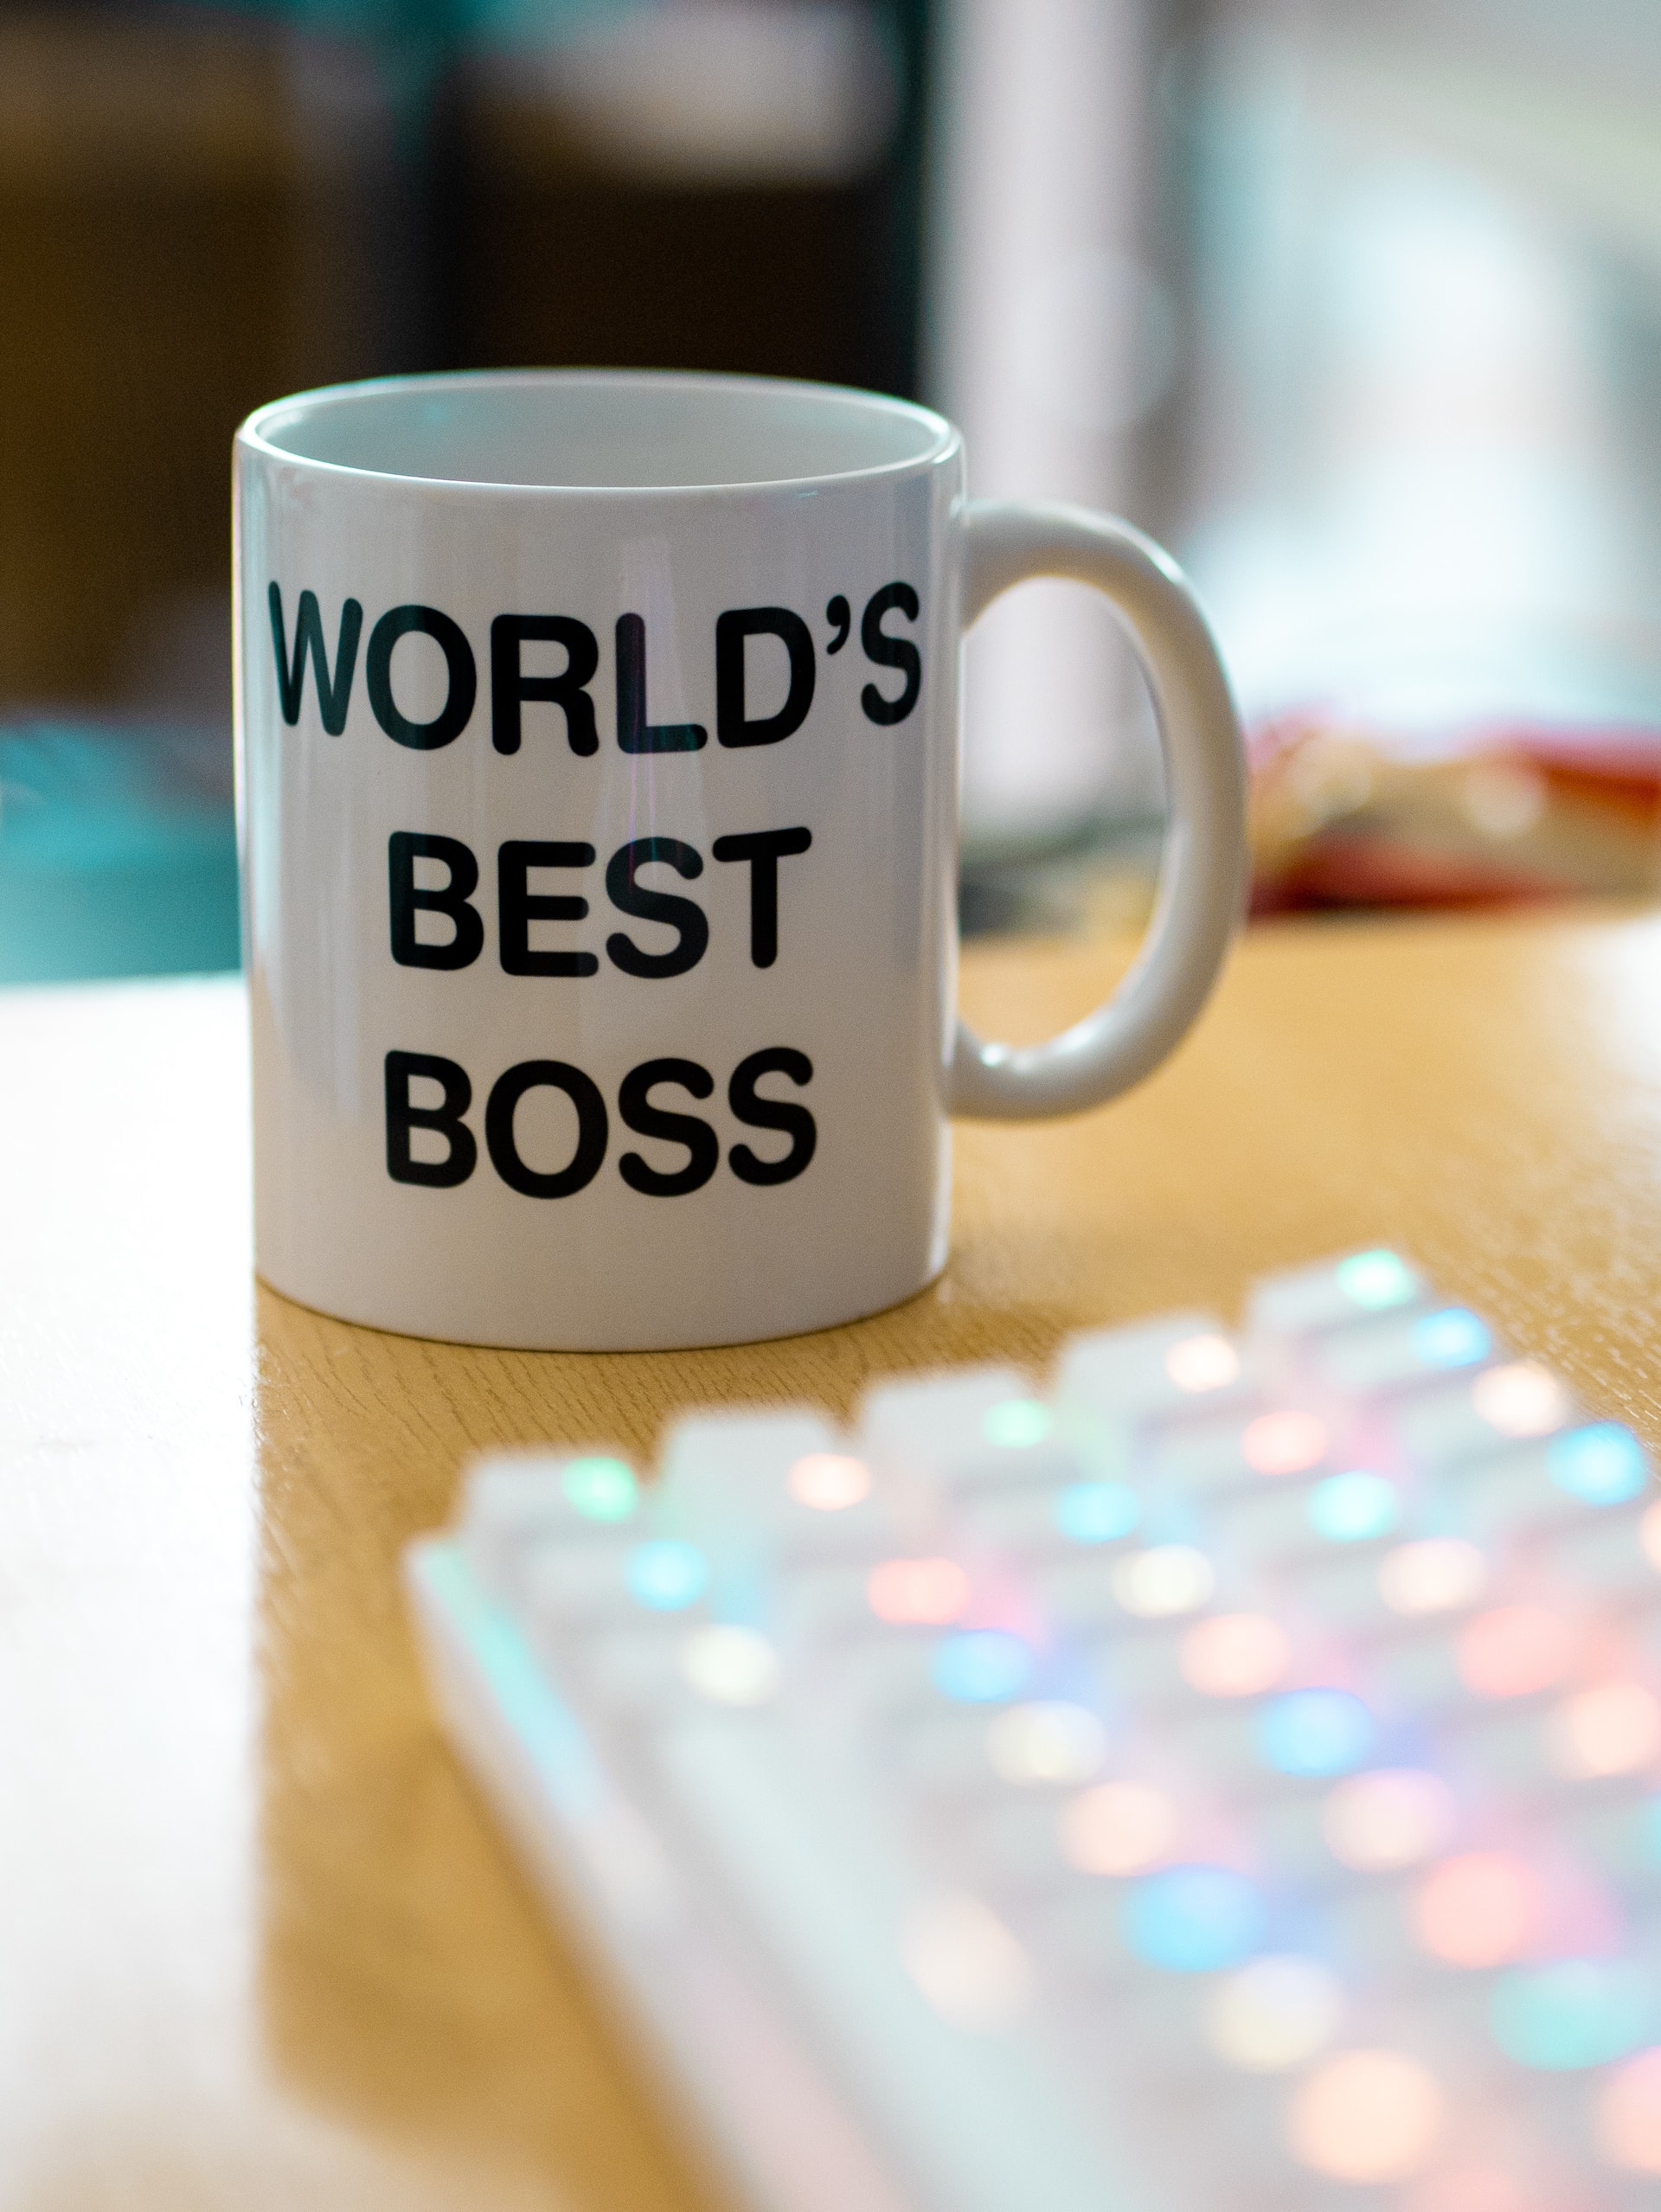 10 Characteristics of a Good Leader Your Boss Should Have